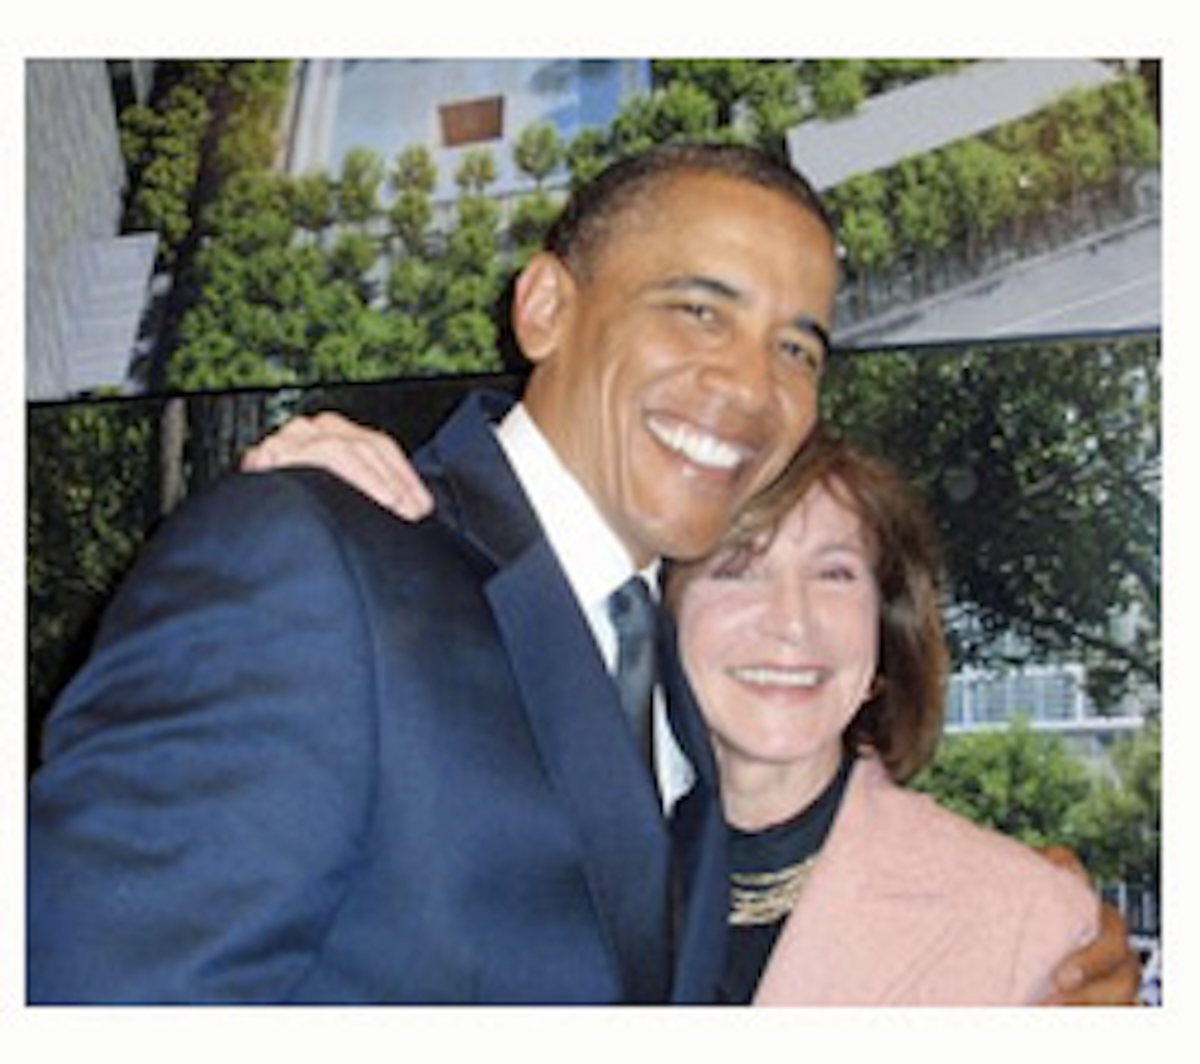 The author with President Obama